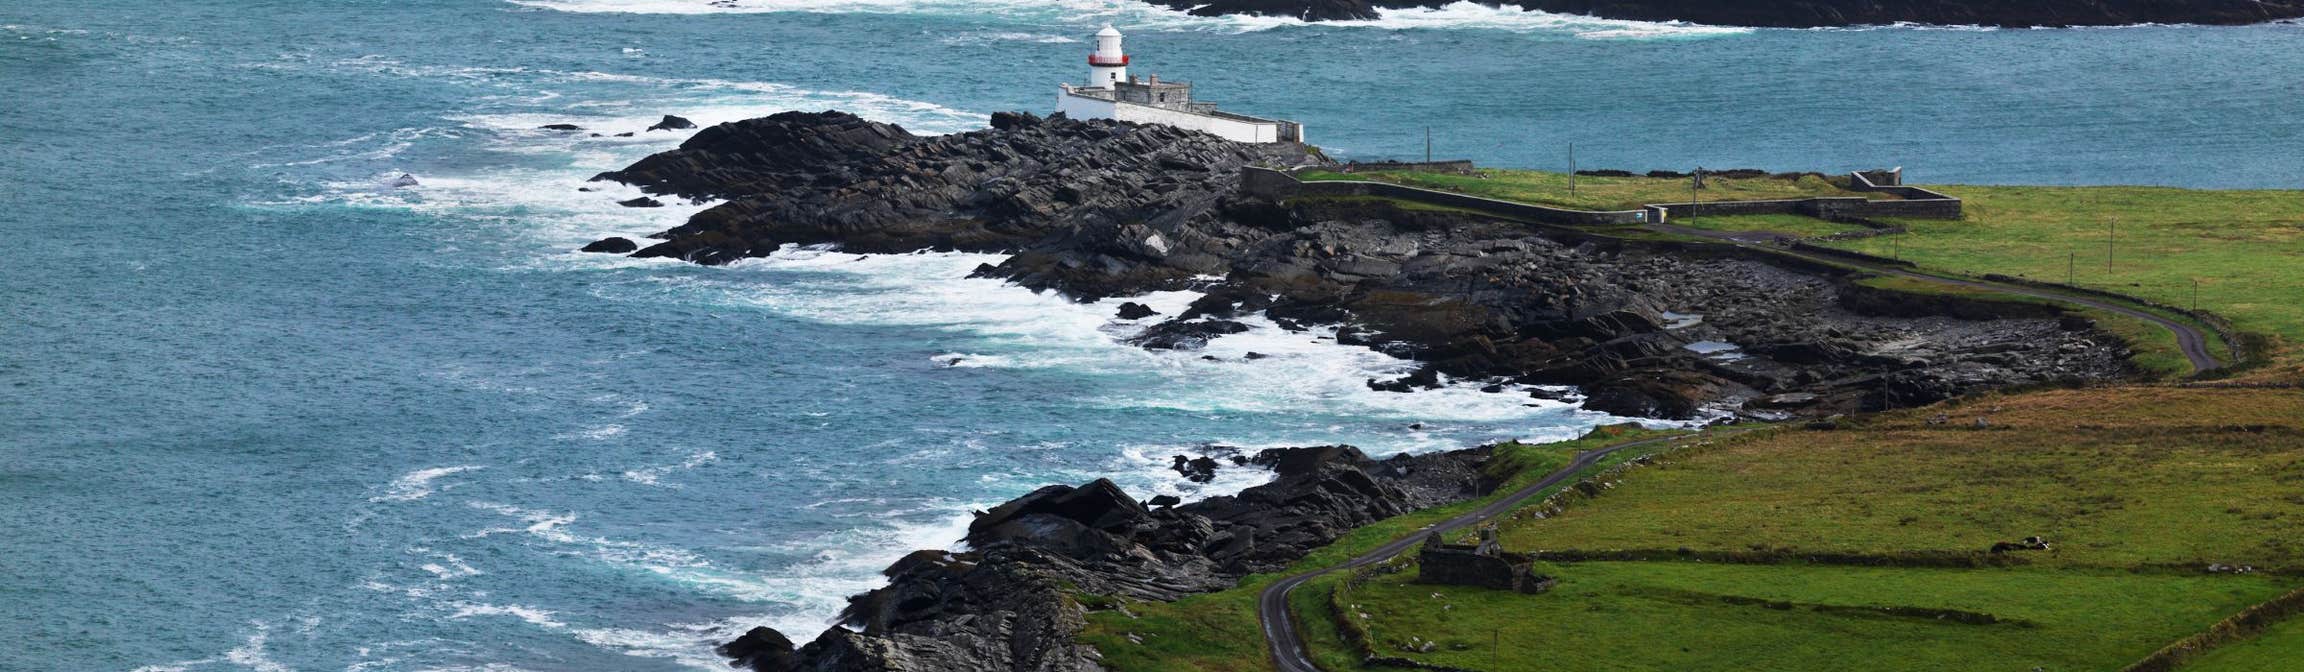 Image of Valentia Lighthouse in County Kerry